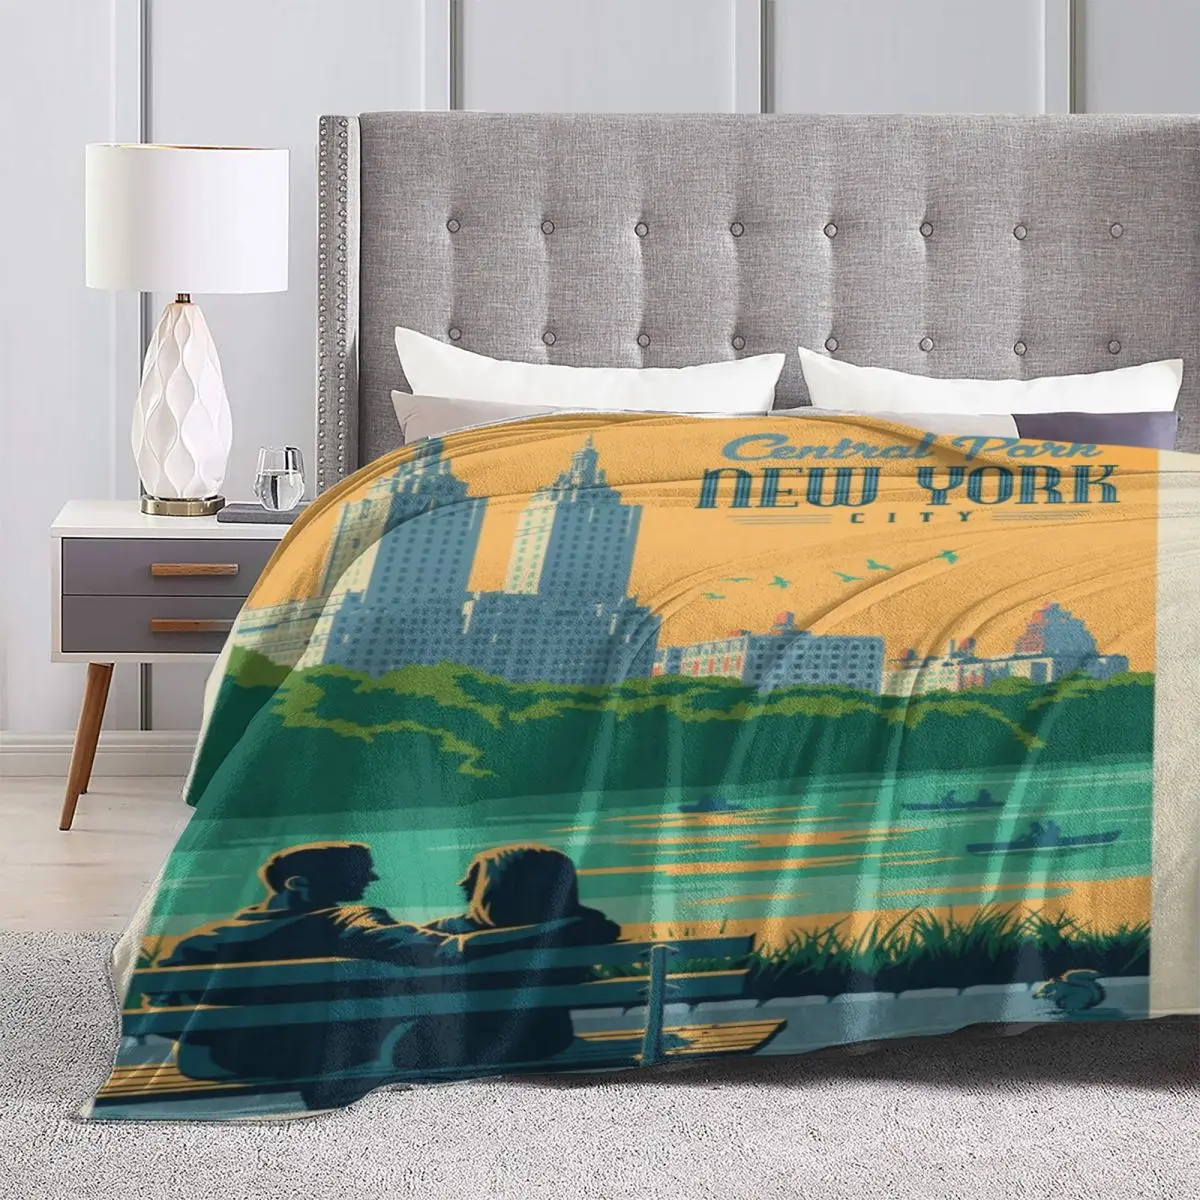 

New York City Central Park Lover Microfiber Fleece Blanket Soft Throw Blanket Warm Flannel Blanket for Couch Sofa Bed Office